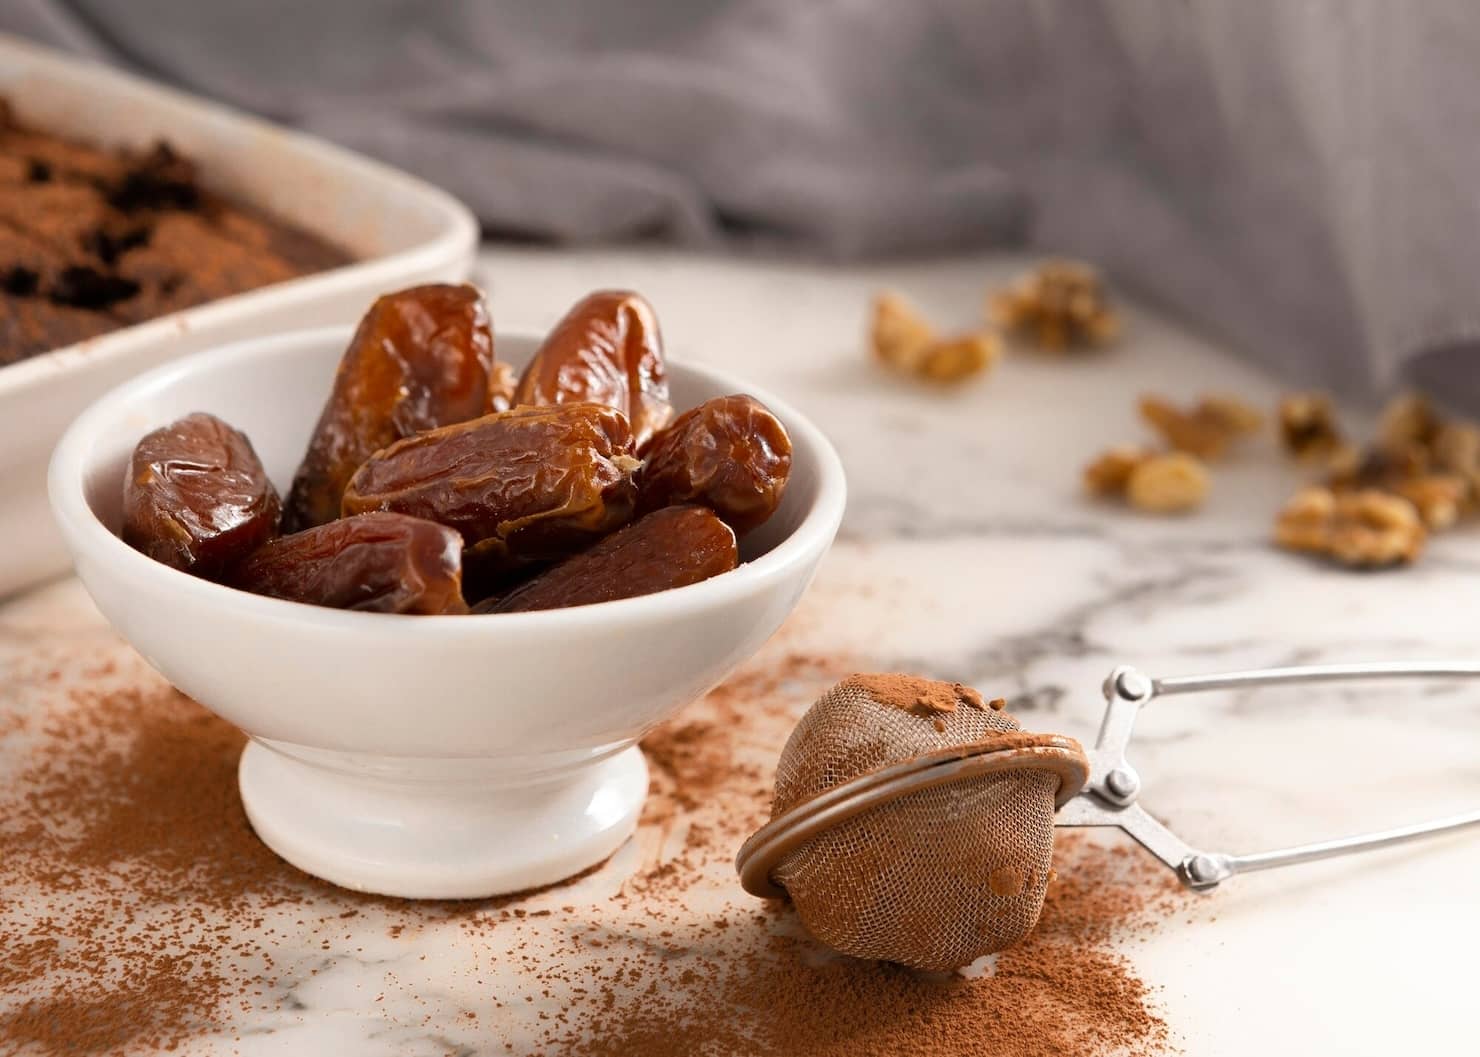 Is There Gluten in Dates?